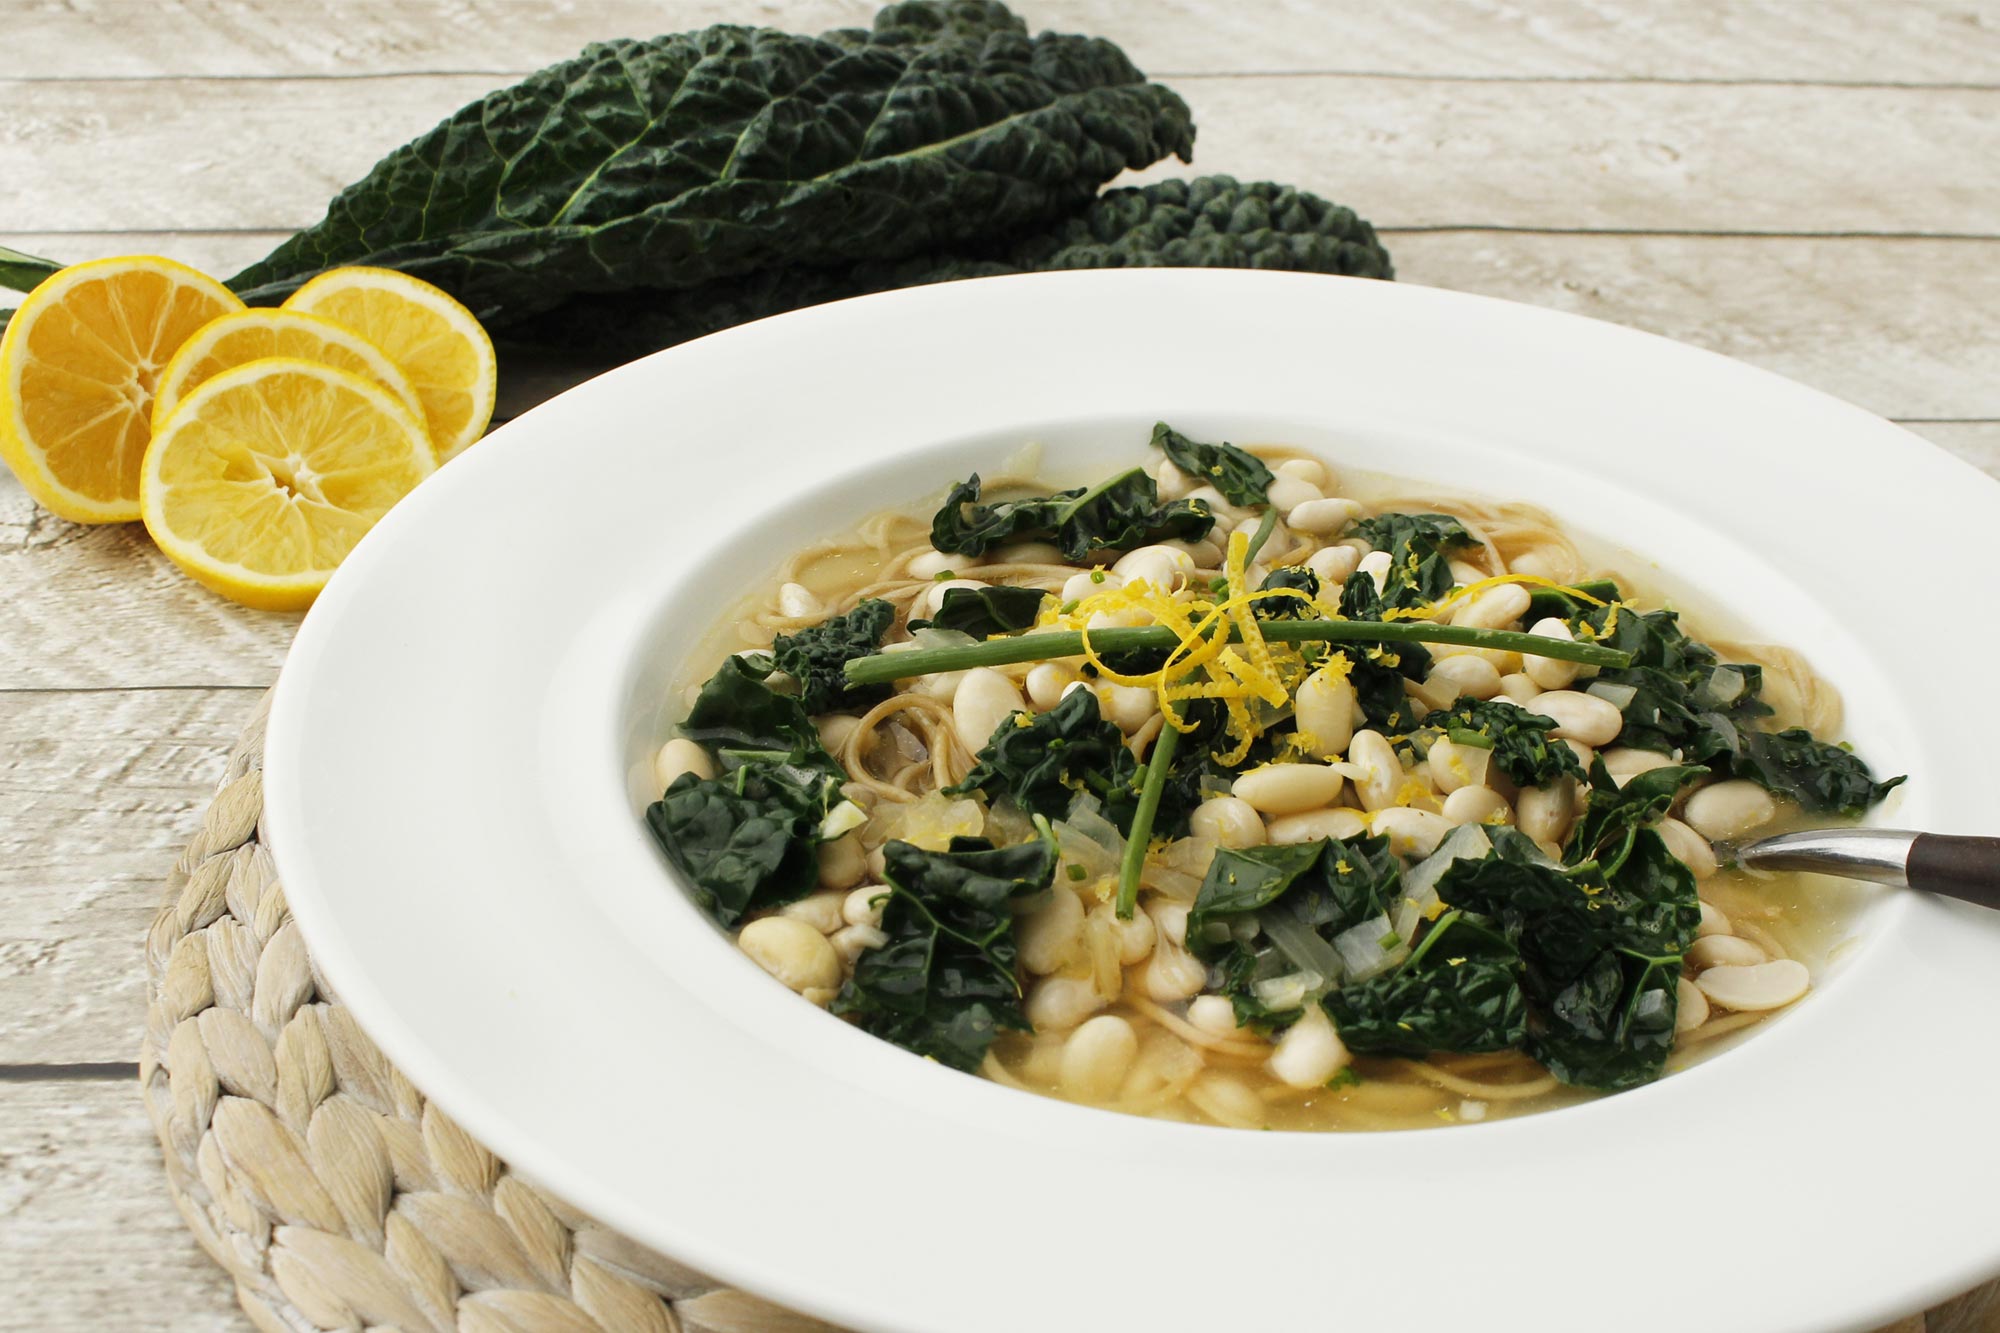 Lemon Soup with Pasta, White Bean and Kale